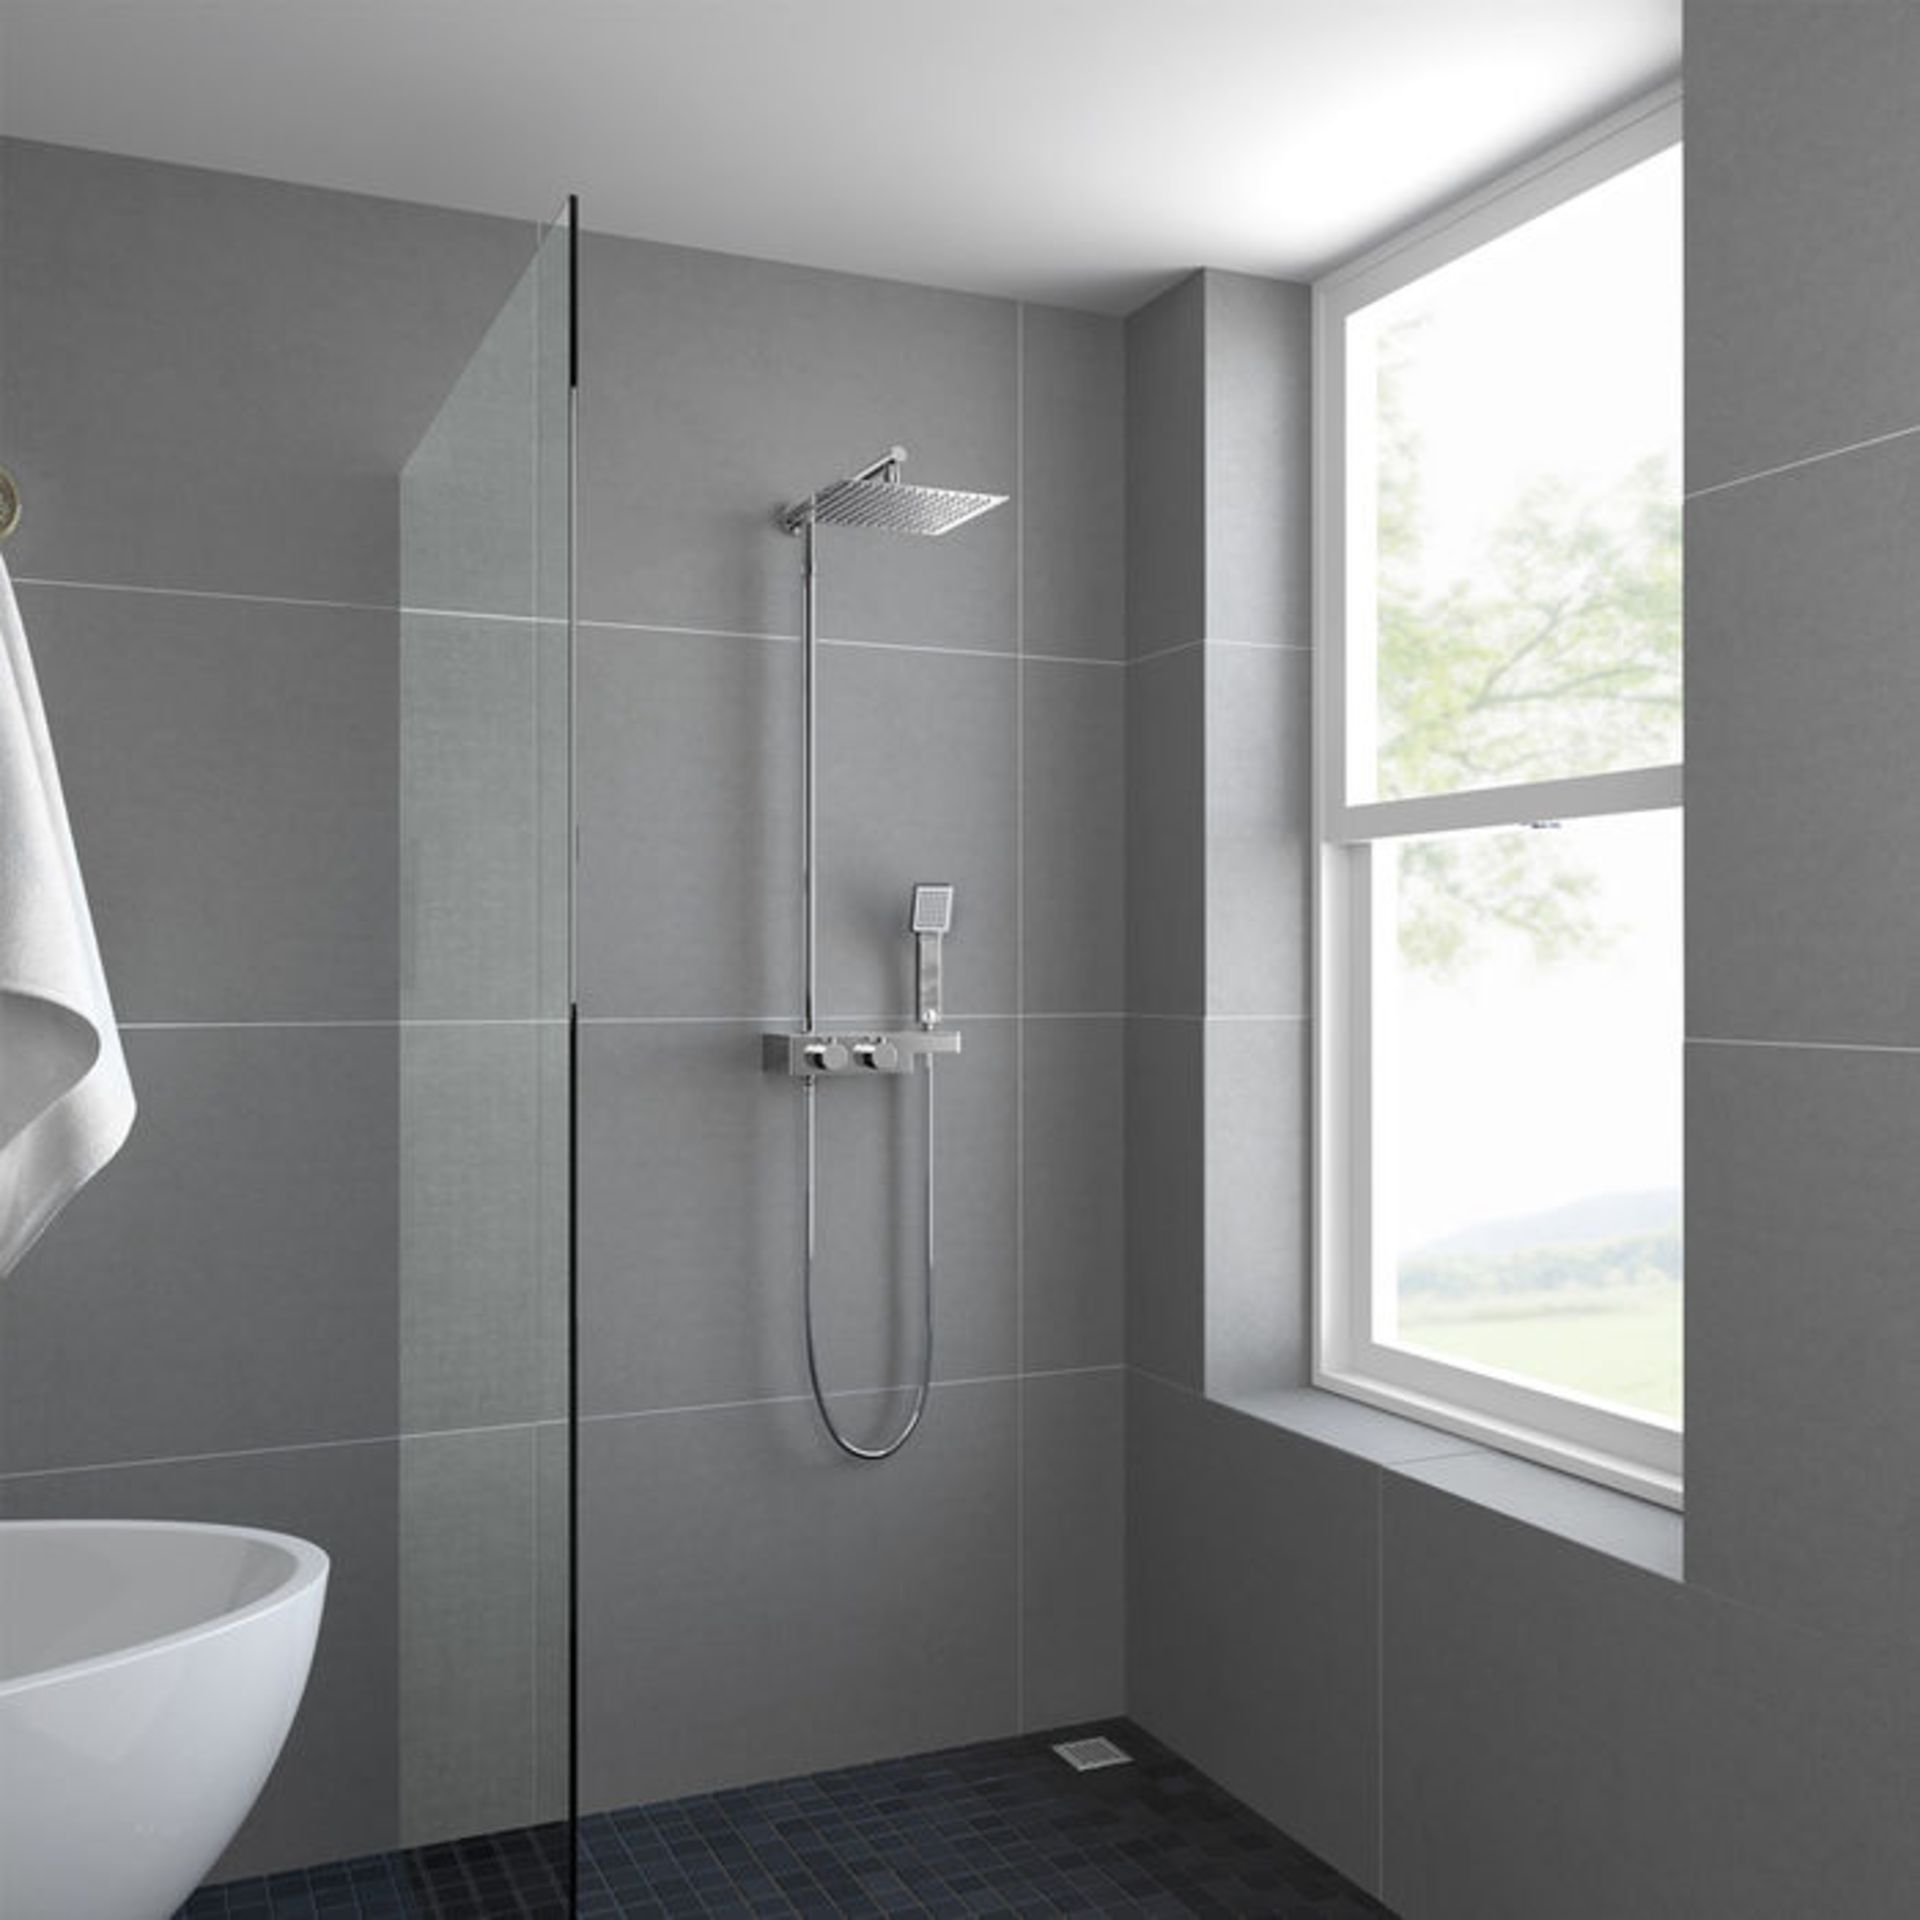 (P312) Square Exposed Thermostatic Shower Shelf, Kit & Large Head. Style meets function with our - Image 4 of 4